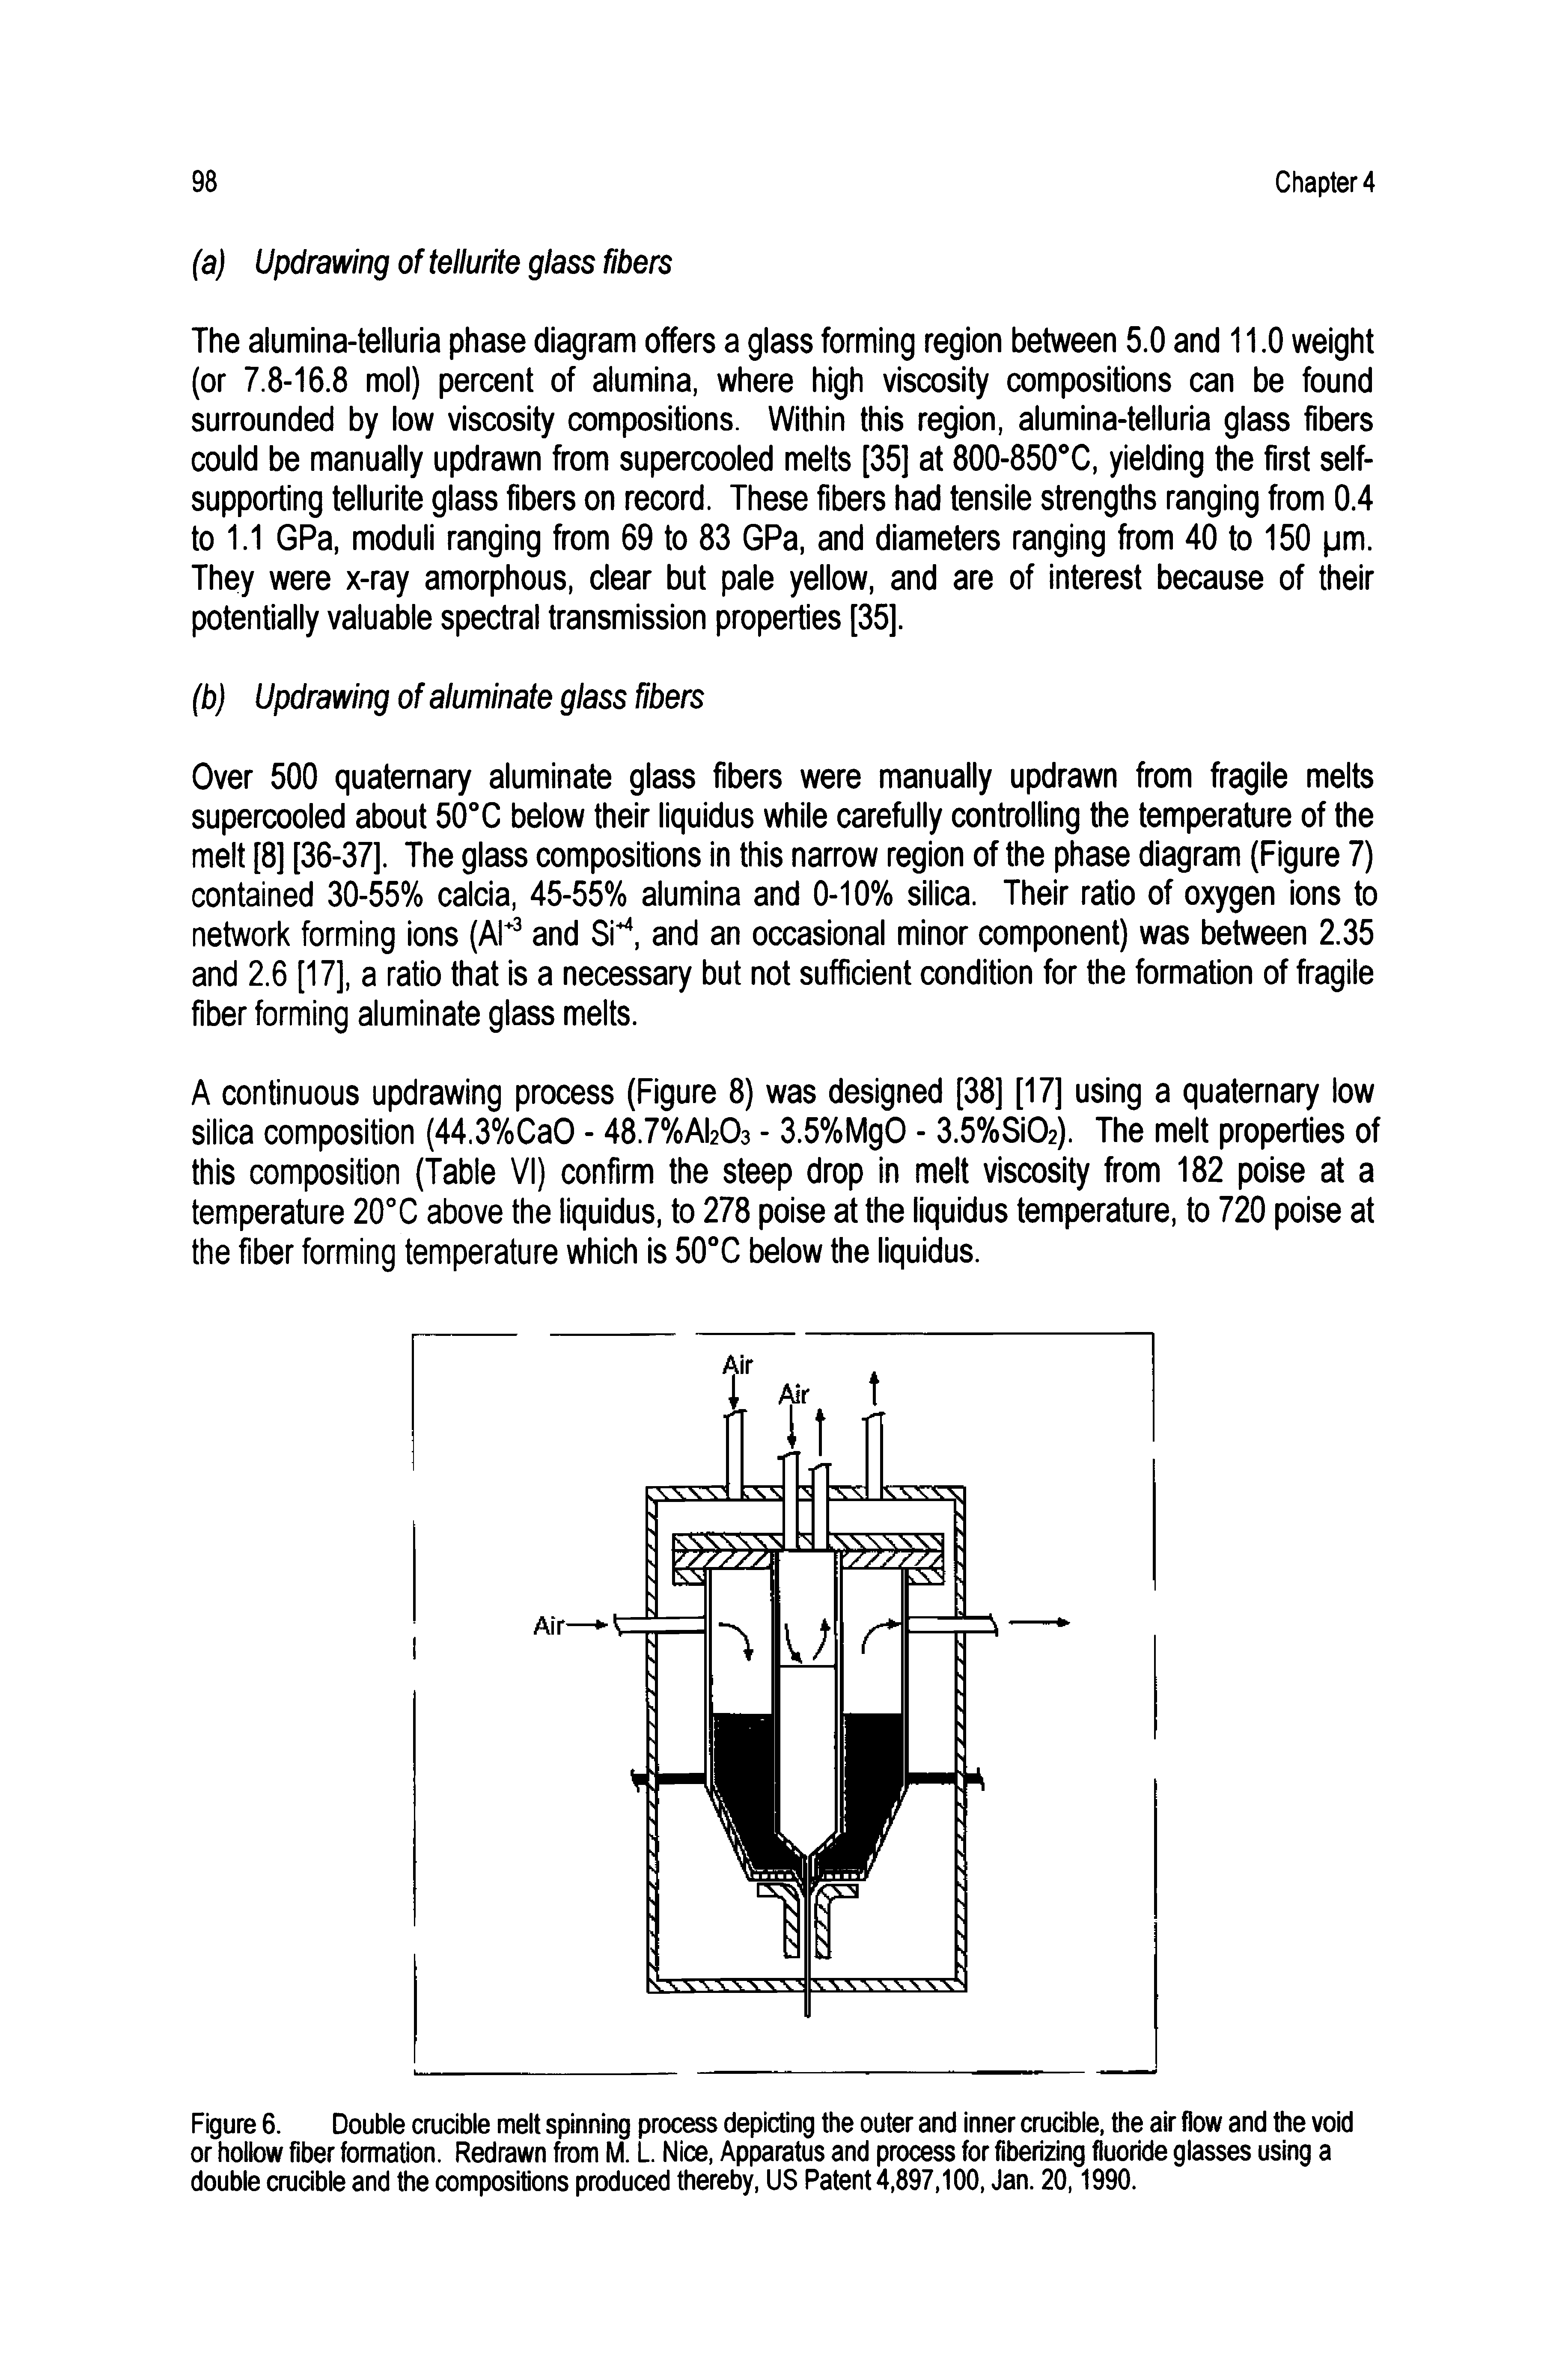 Figure 6. Double crucible melt spinning process depicting the outer and inner crucible, the air flow and the void or hollow fiber formation. Redrawn from M. L. Nice, Apparatus and process for fiberizing fluoride glasses using a double crucible and the compositions produced thereby, US Patent 4,897,100, Jan. 20,1990.